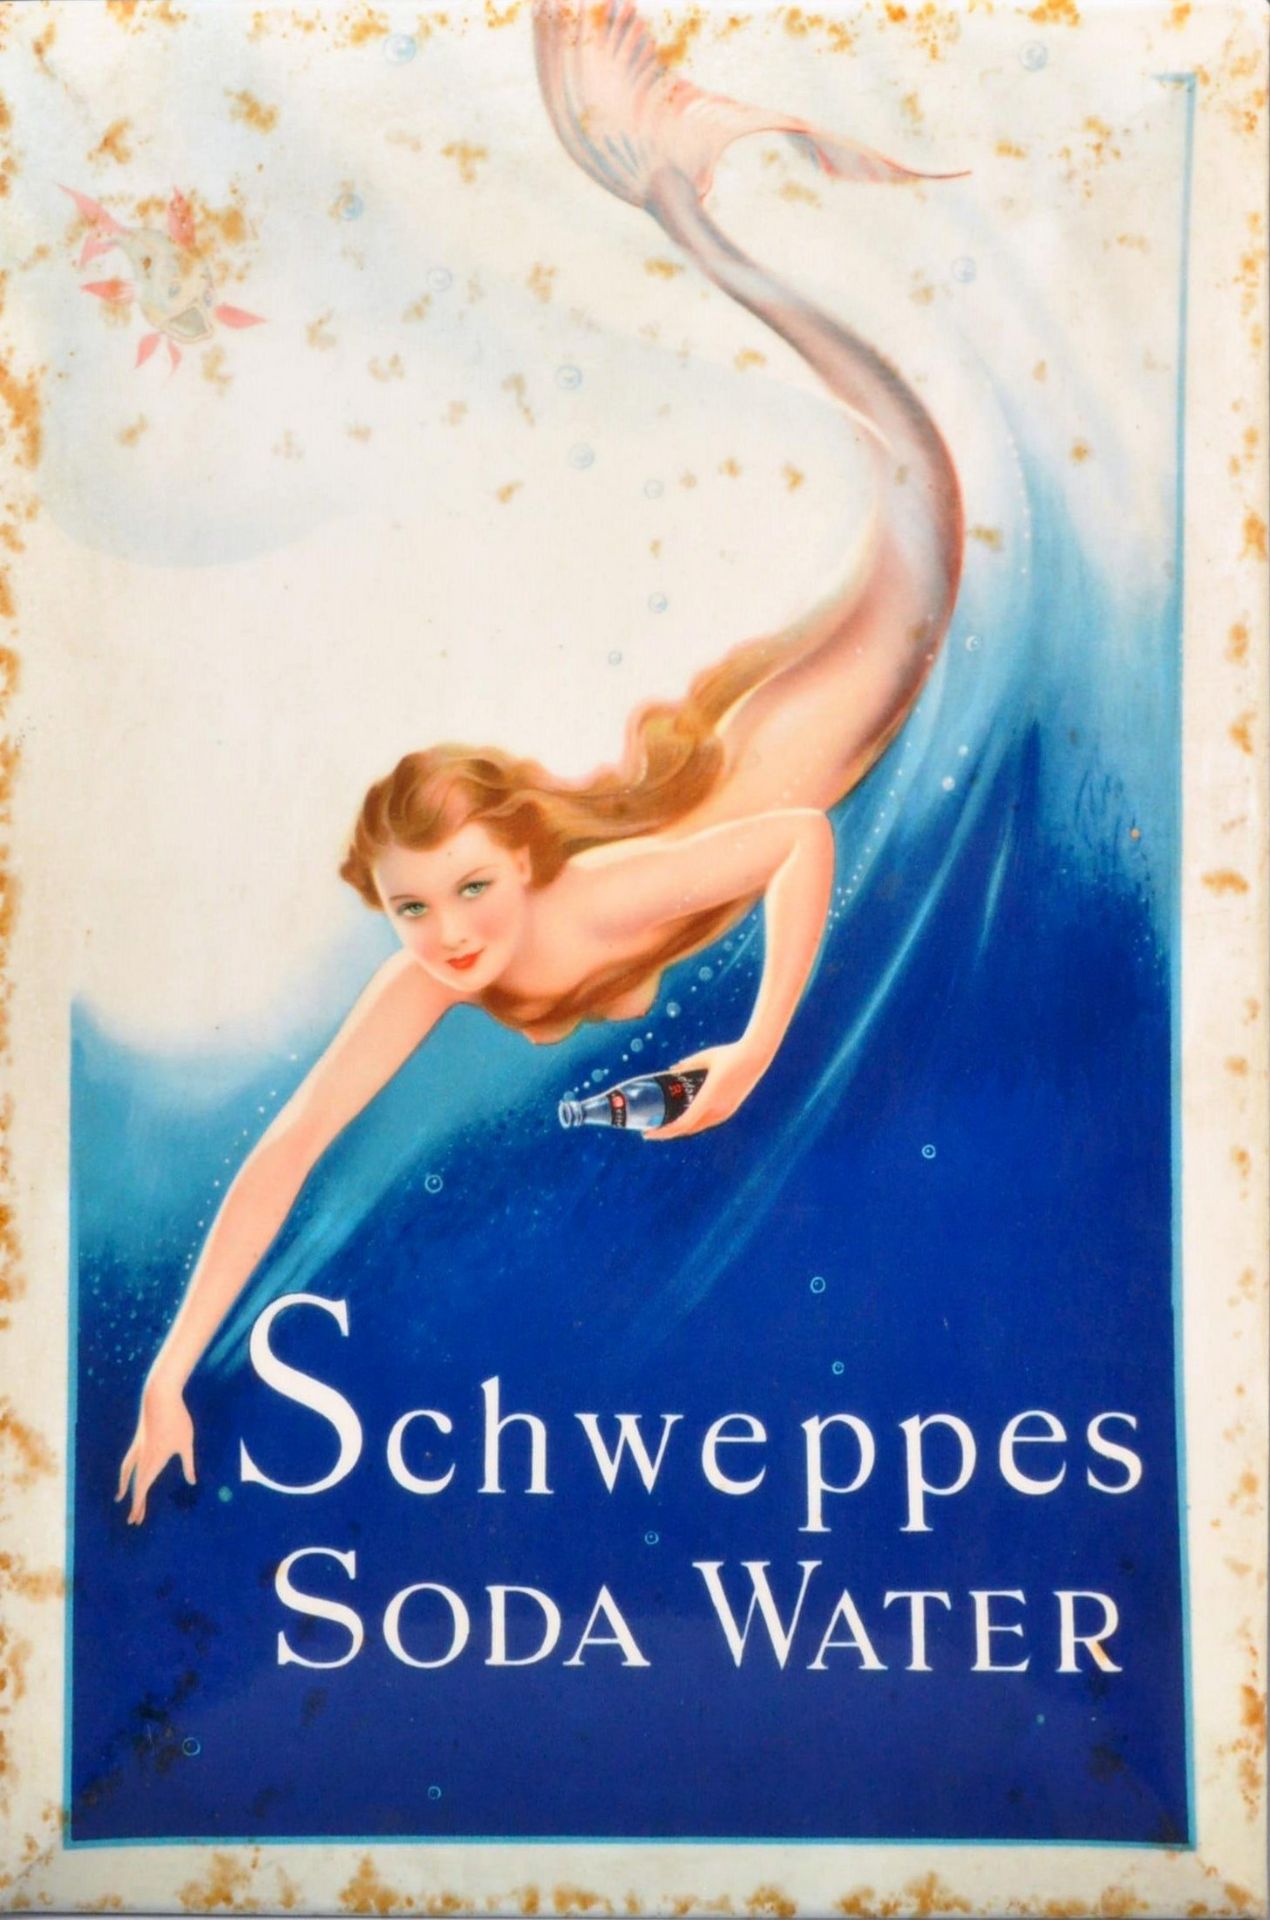 SCHWEPPES SODA WATER - PICTORIAL ADVERTISING SHOP SIGN - Image 2 of 5